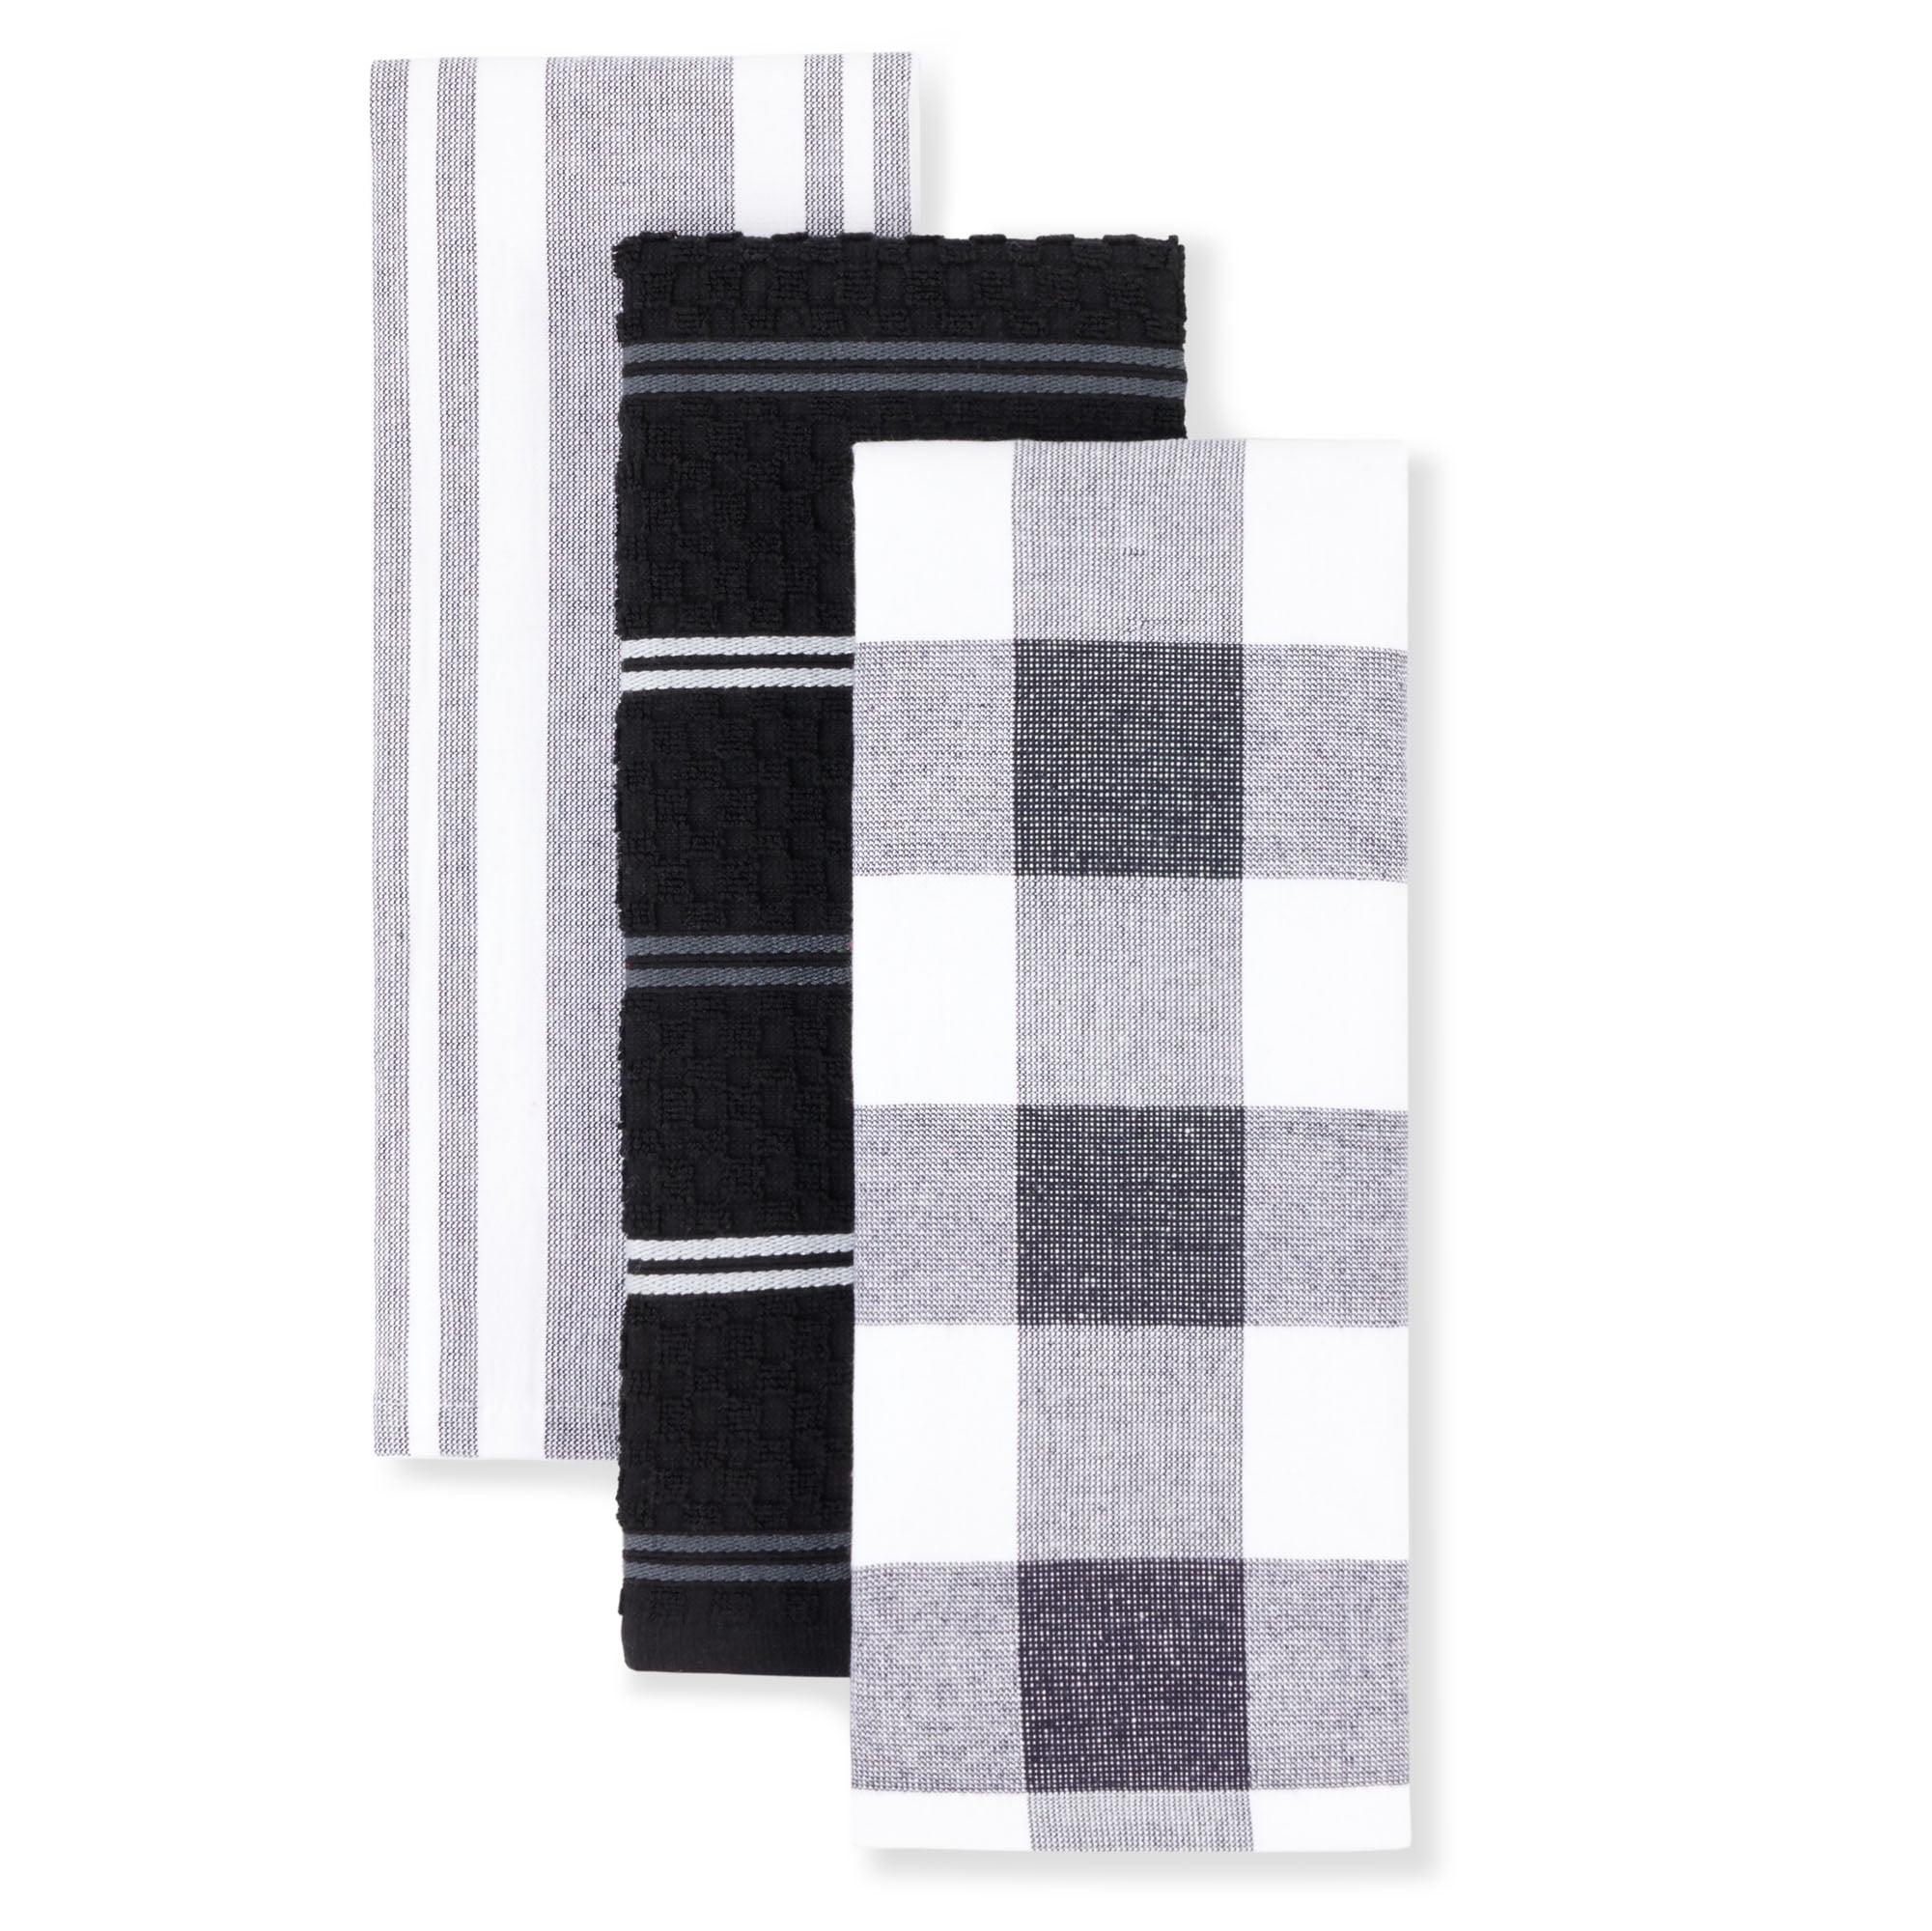 All-Clad Stripe Dual Sided Woven Kitchen Towel, Set of 3 - Black